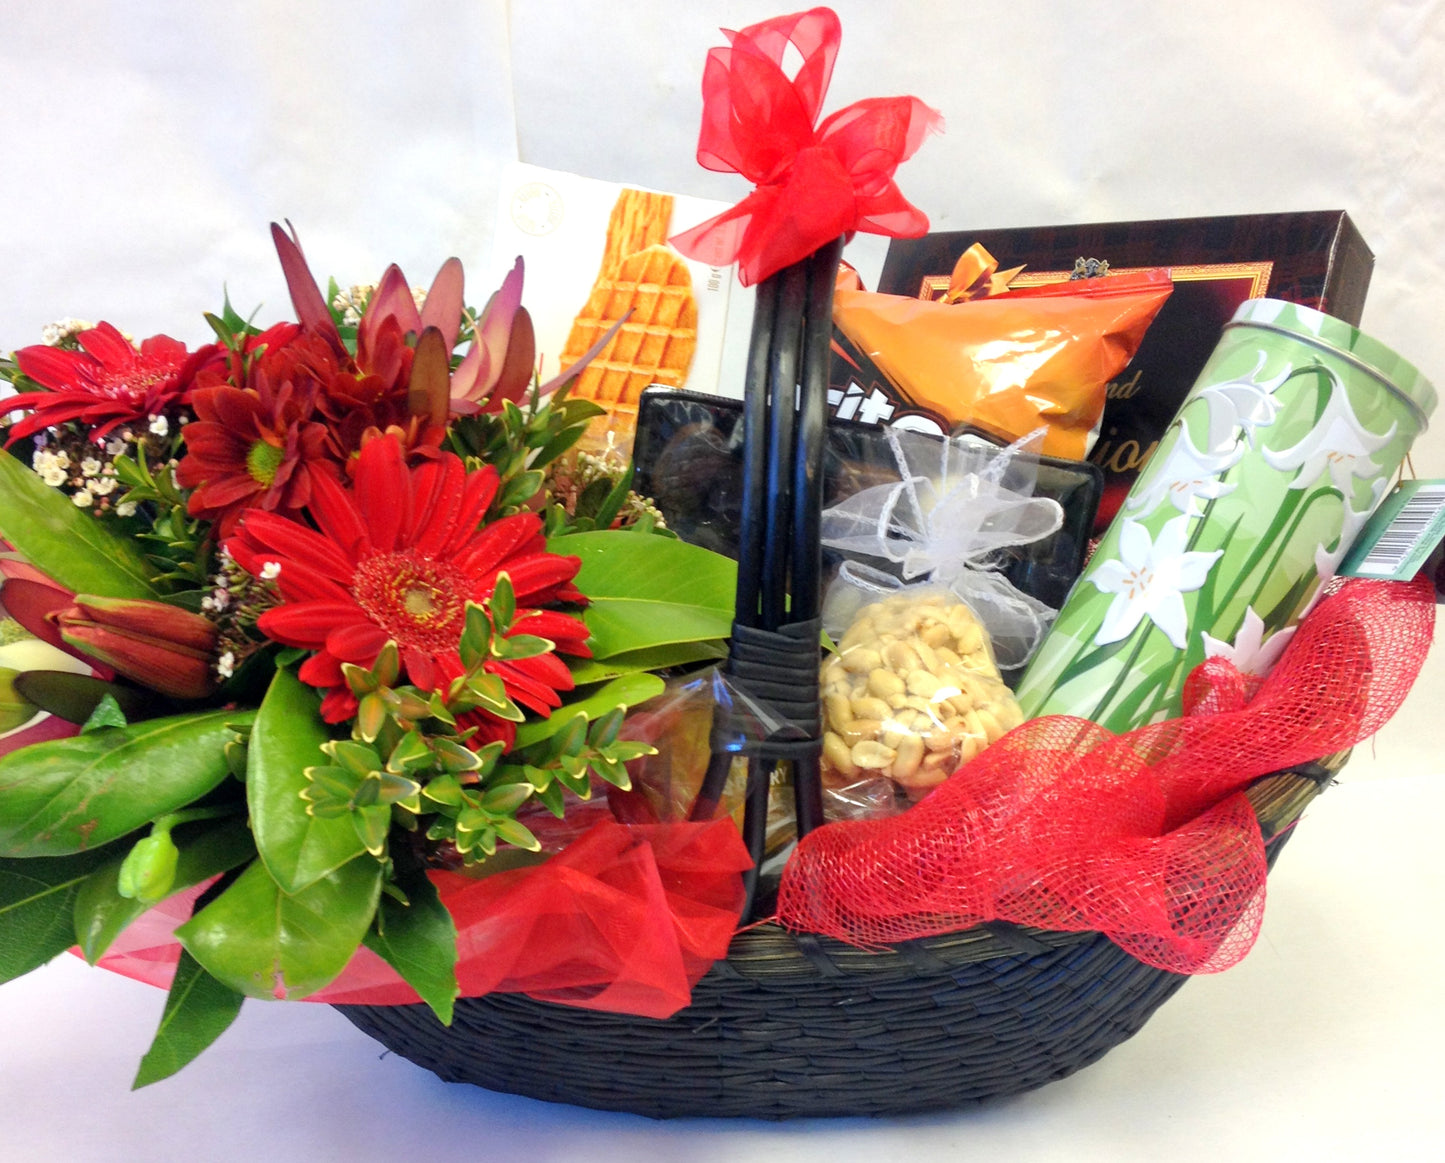 Flowers and gourmet treats in basket